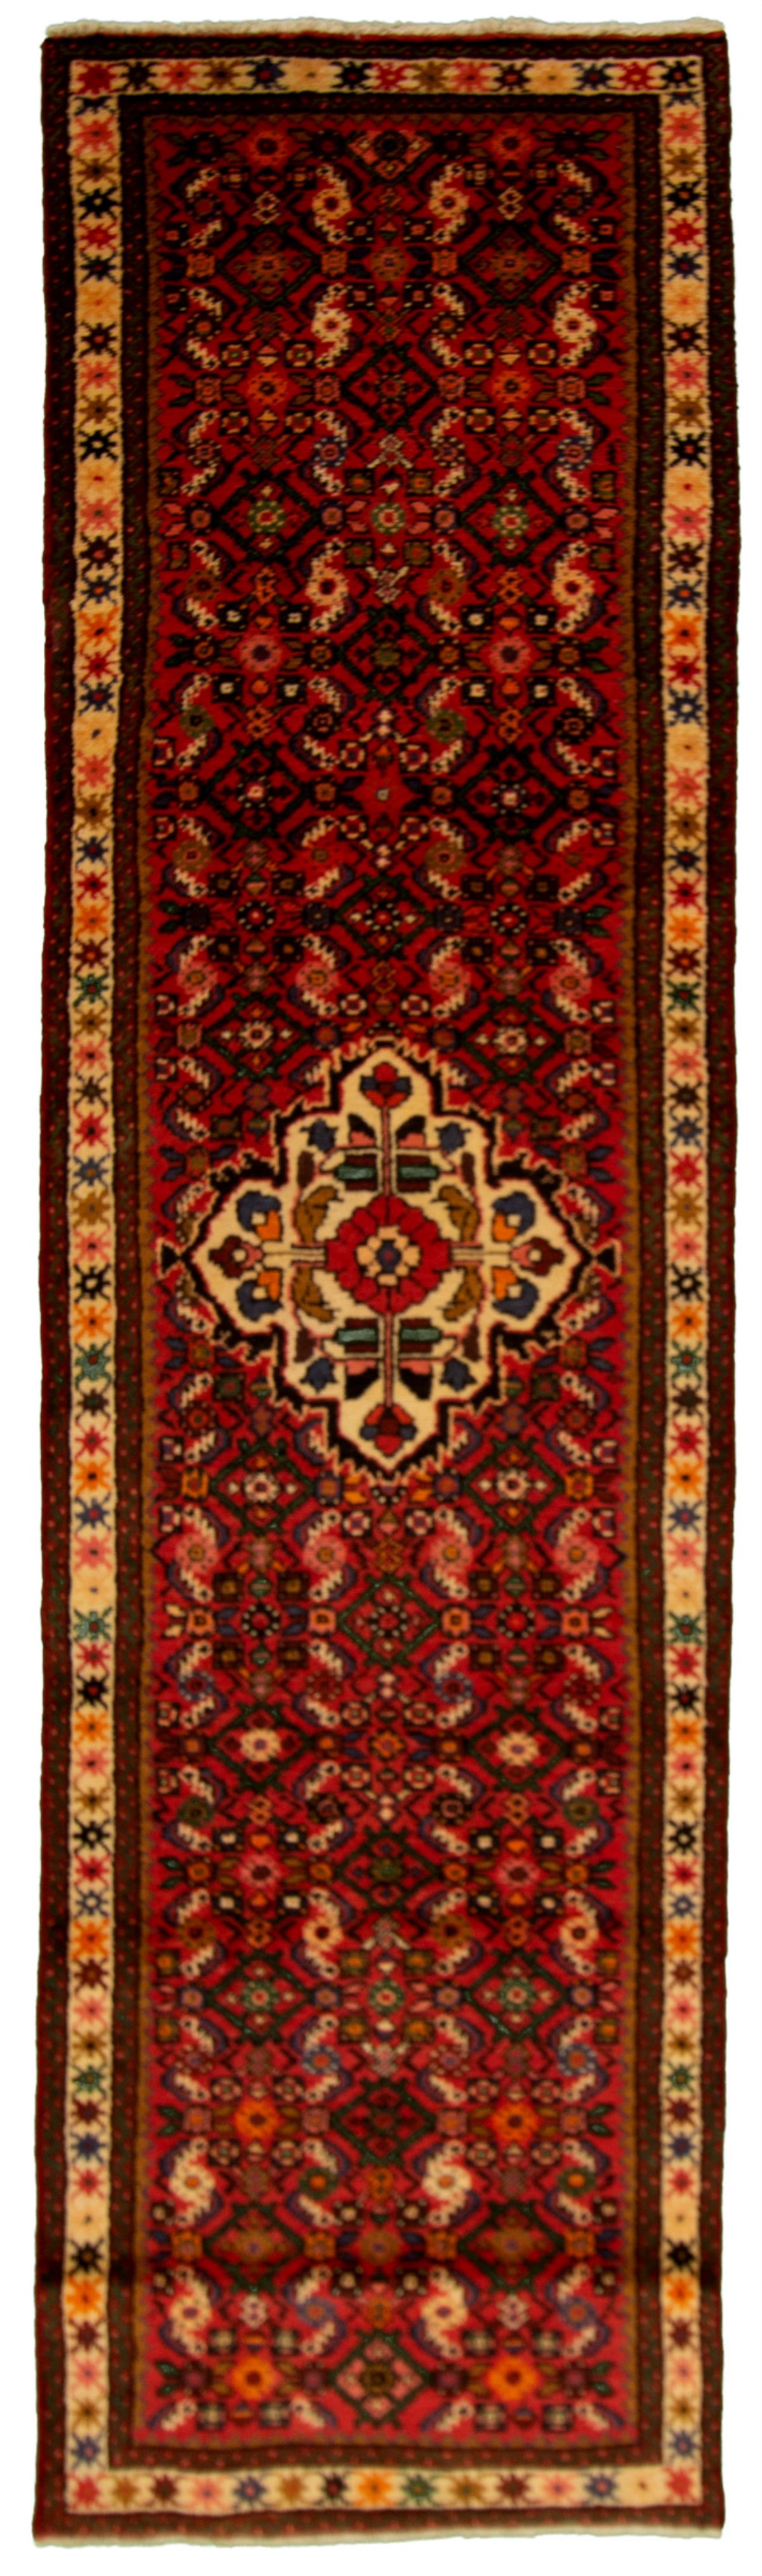 Hand-knotted Hosseinabad Red Wool Rug 2'7" x 10'2"  Size: 2'7" x 10'2"  